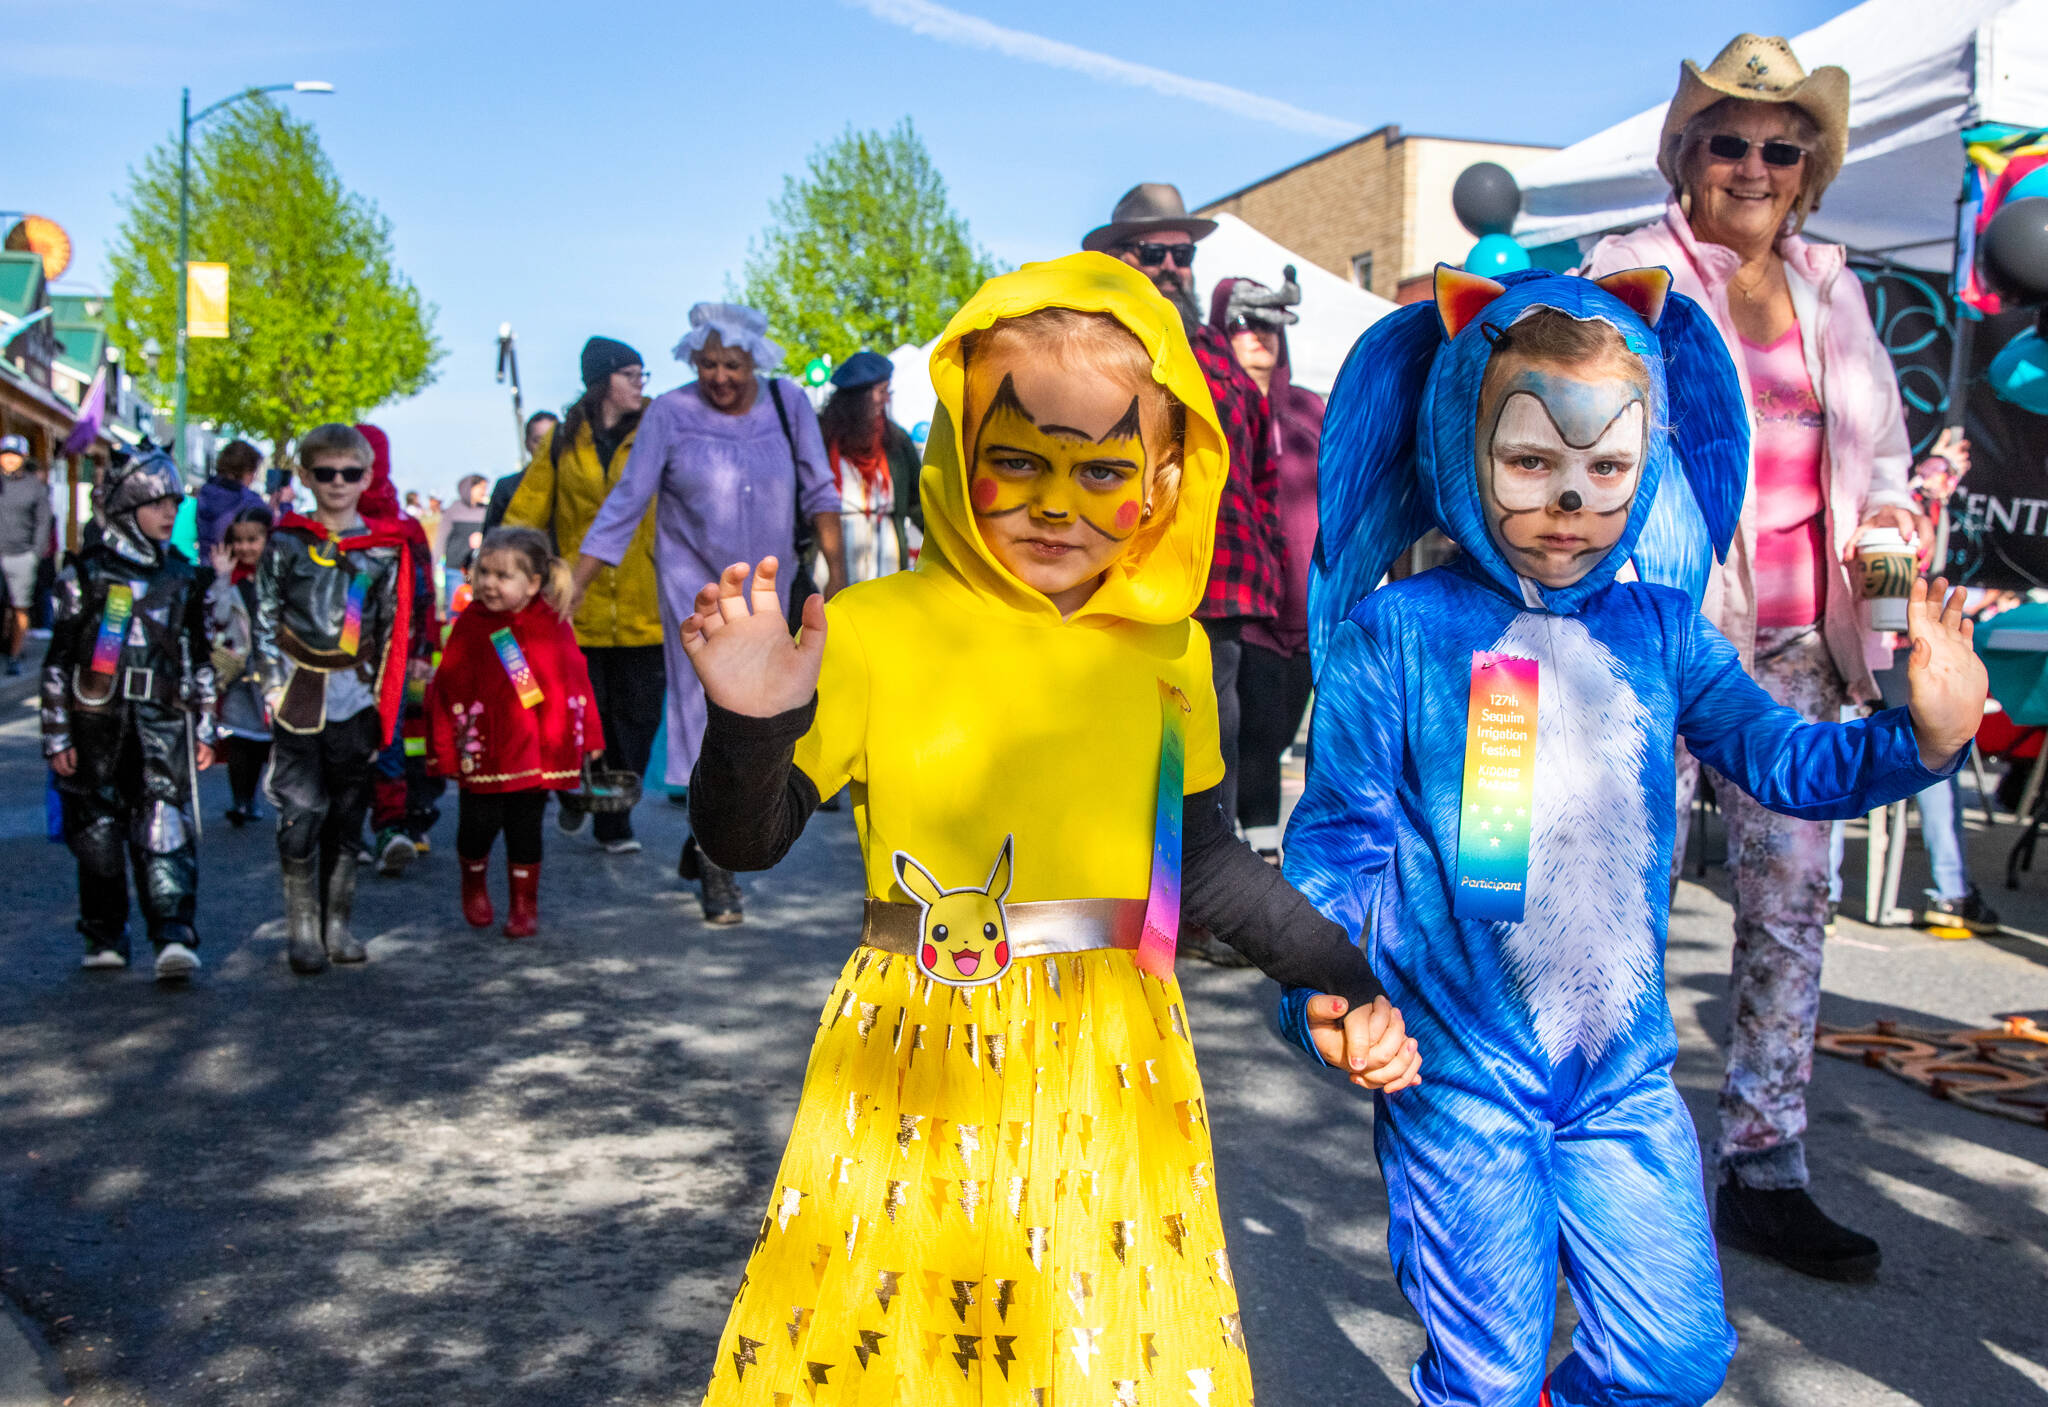 Pikachu and Sonic the Hedgehog participate in the Kids Parade during the first weekend of Sequim’s annual Irrigation Festival. This year marks the 127th anniversary of the festival. The Grand Parade will be conducted next Saturday. (Emily Matthiessen/Olympic Peninsula News Group)